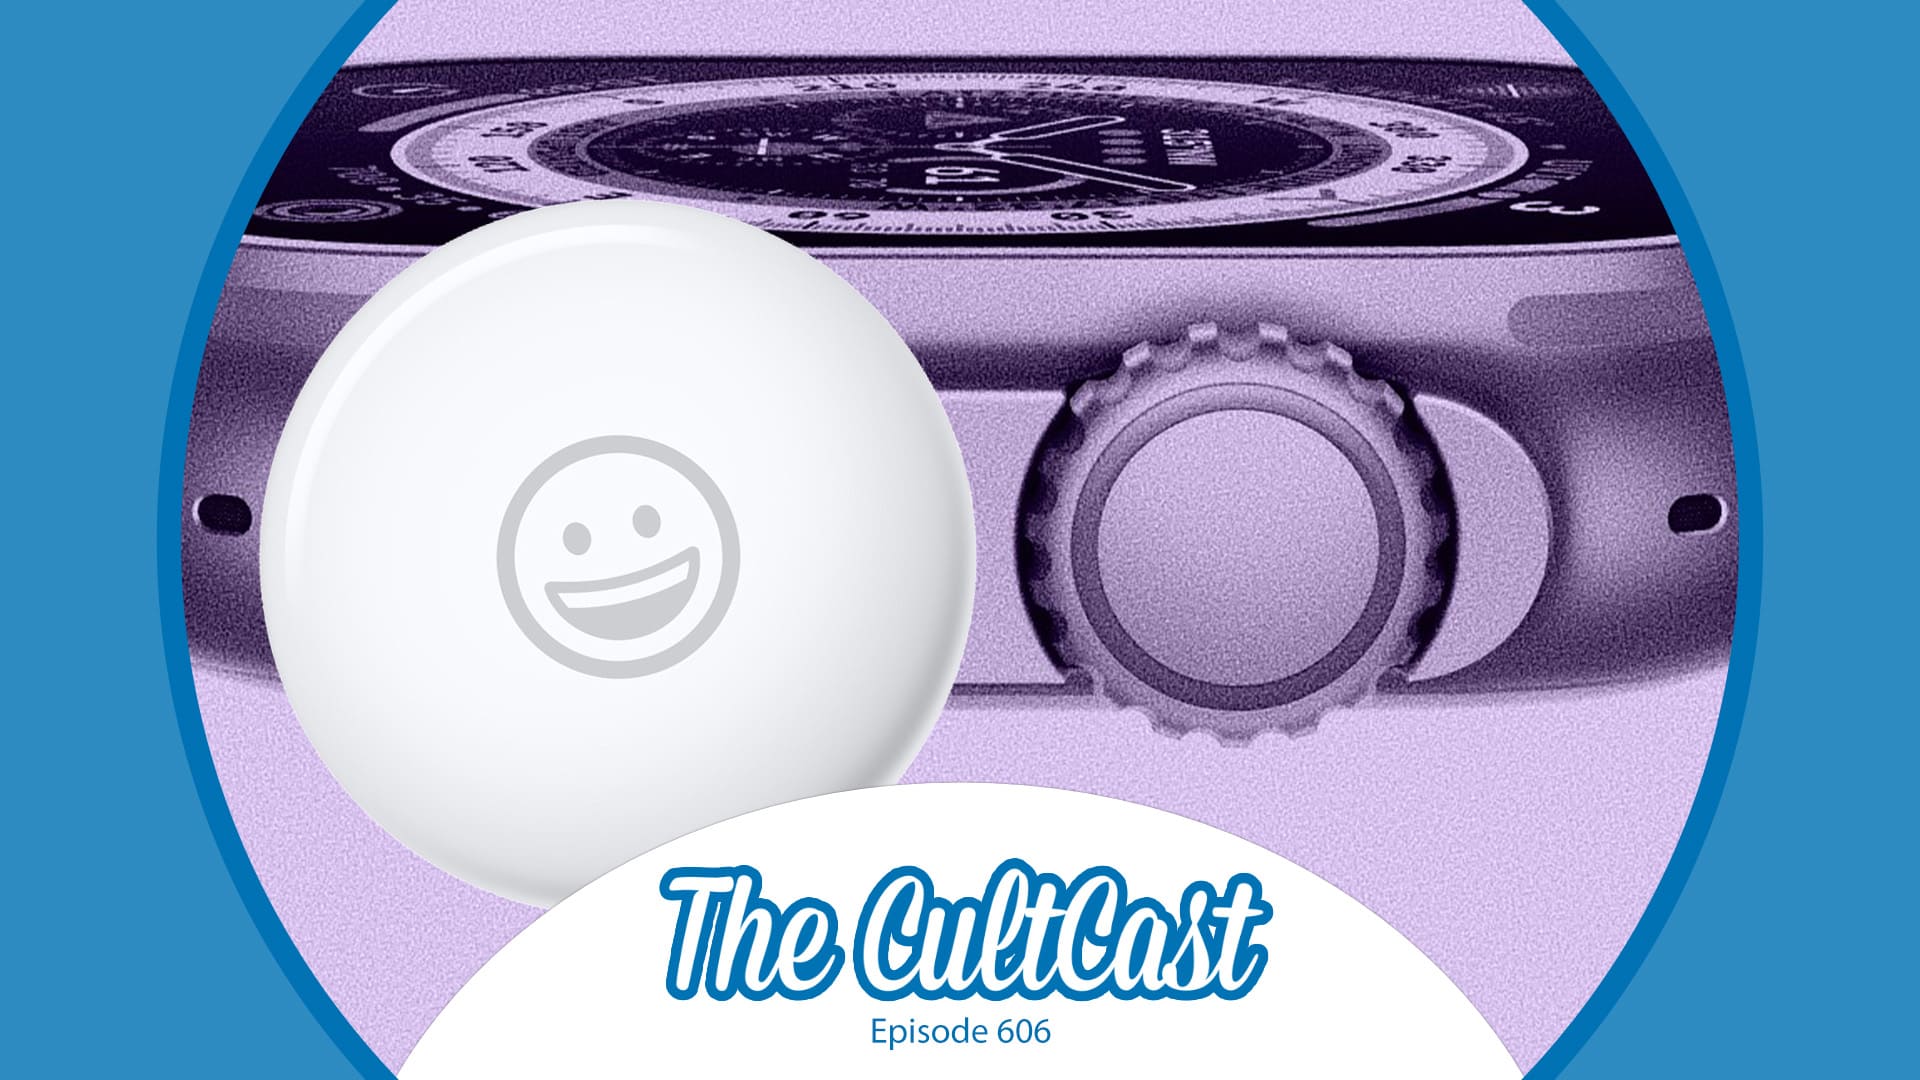 New AirTag and Apple Watch rumors make us giddy [The CultCast]